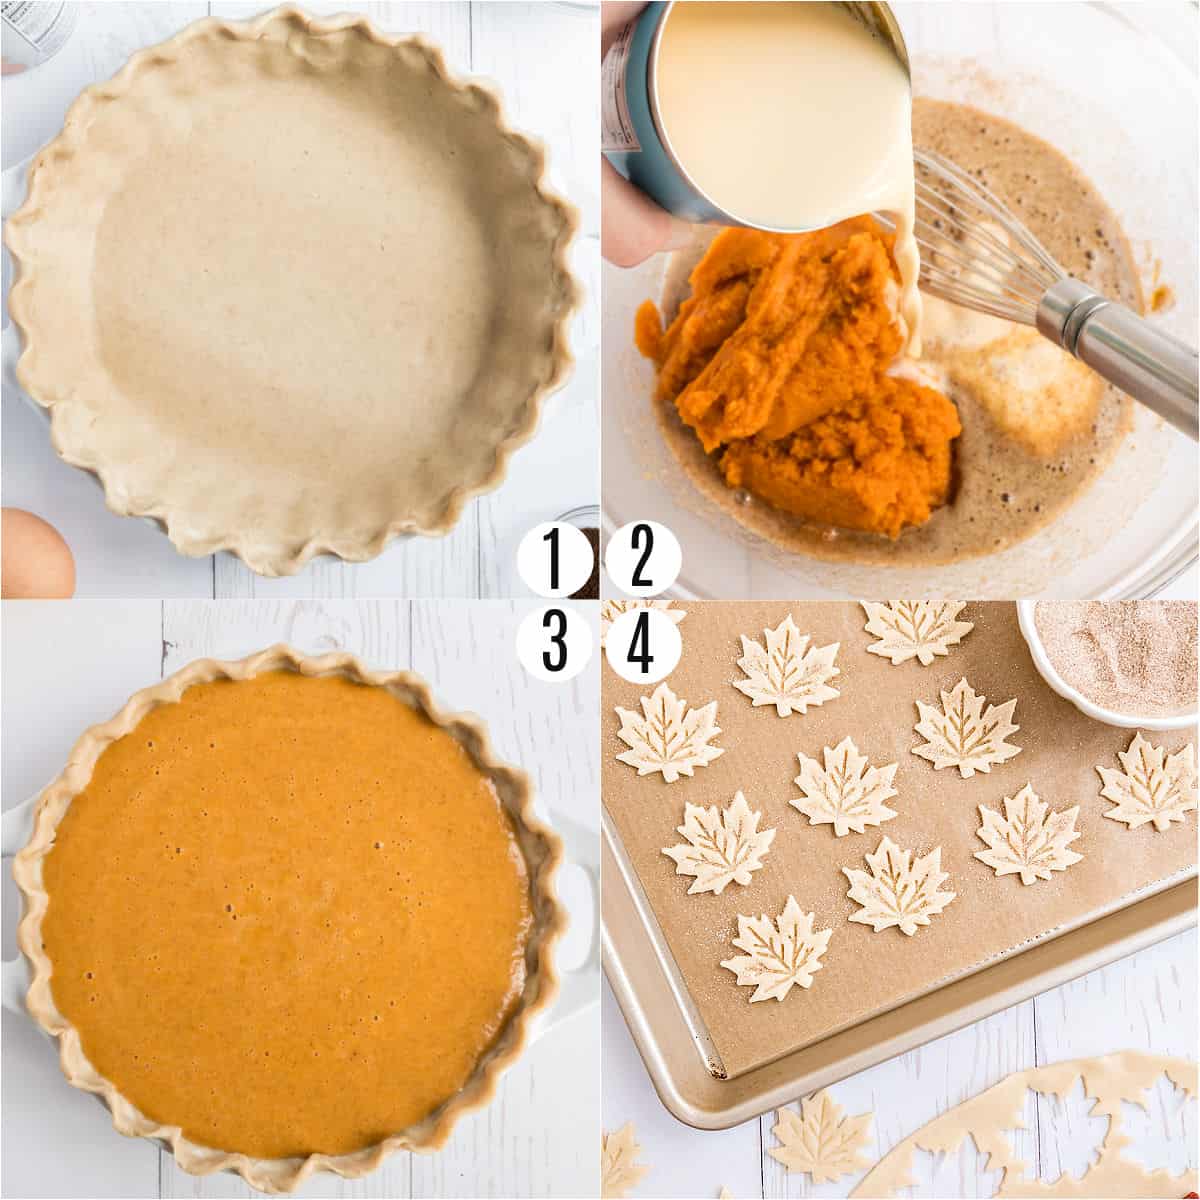 Step by step photos showing how to make pumpkin pie.